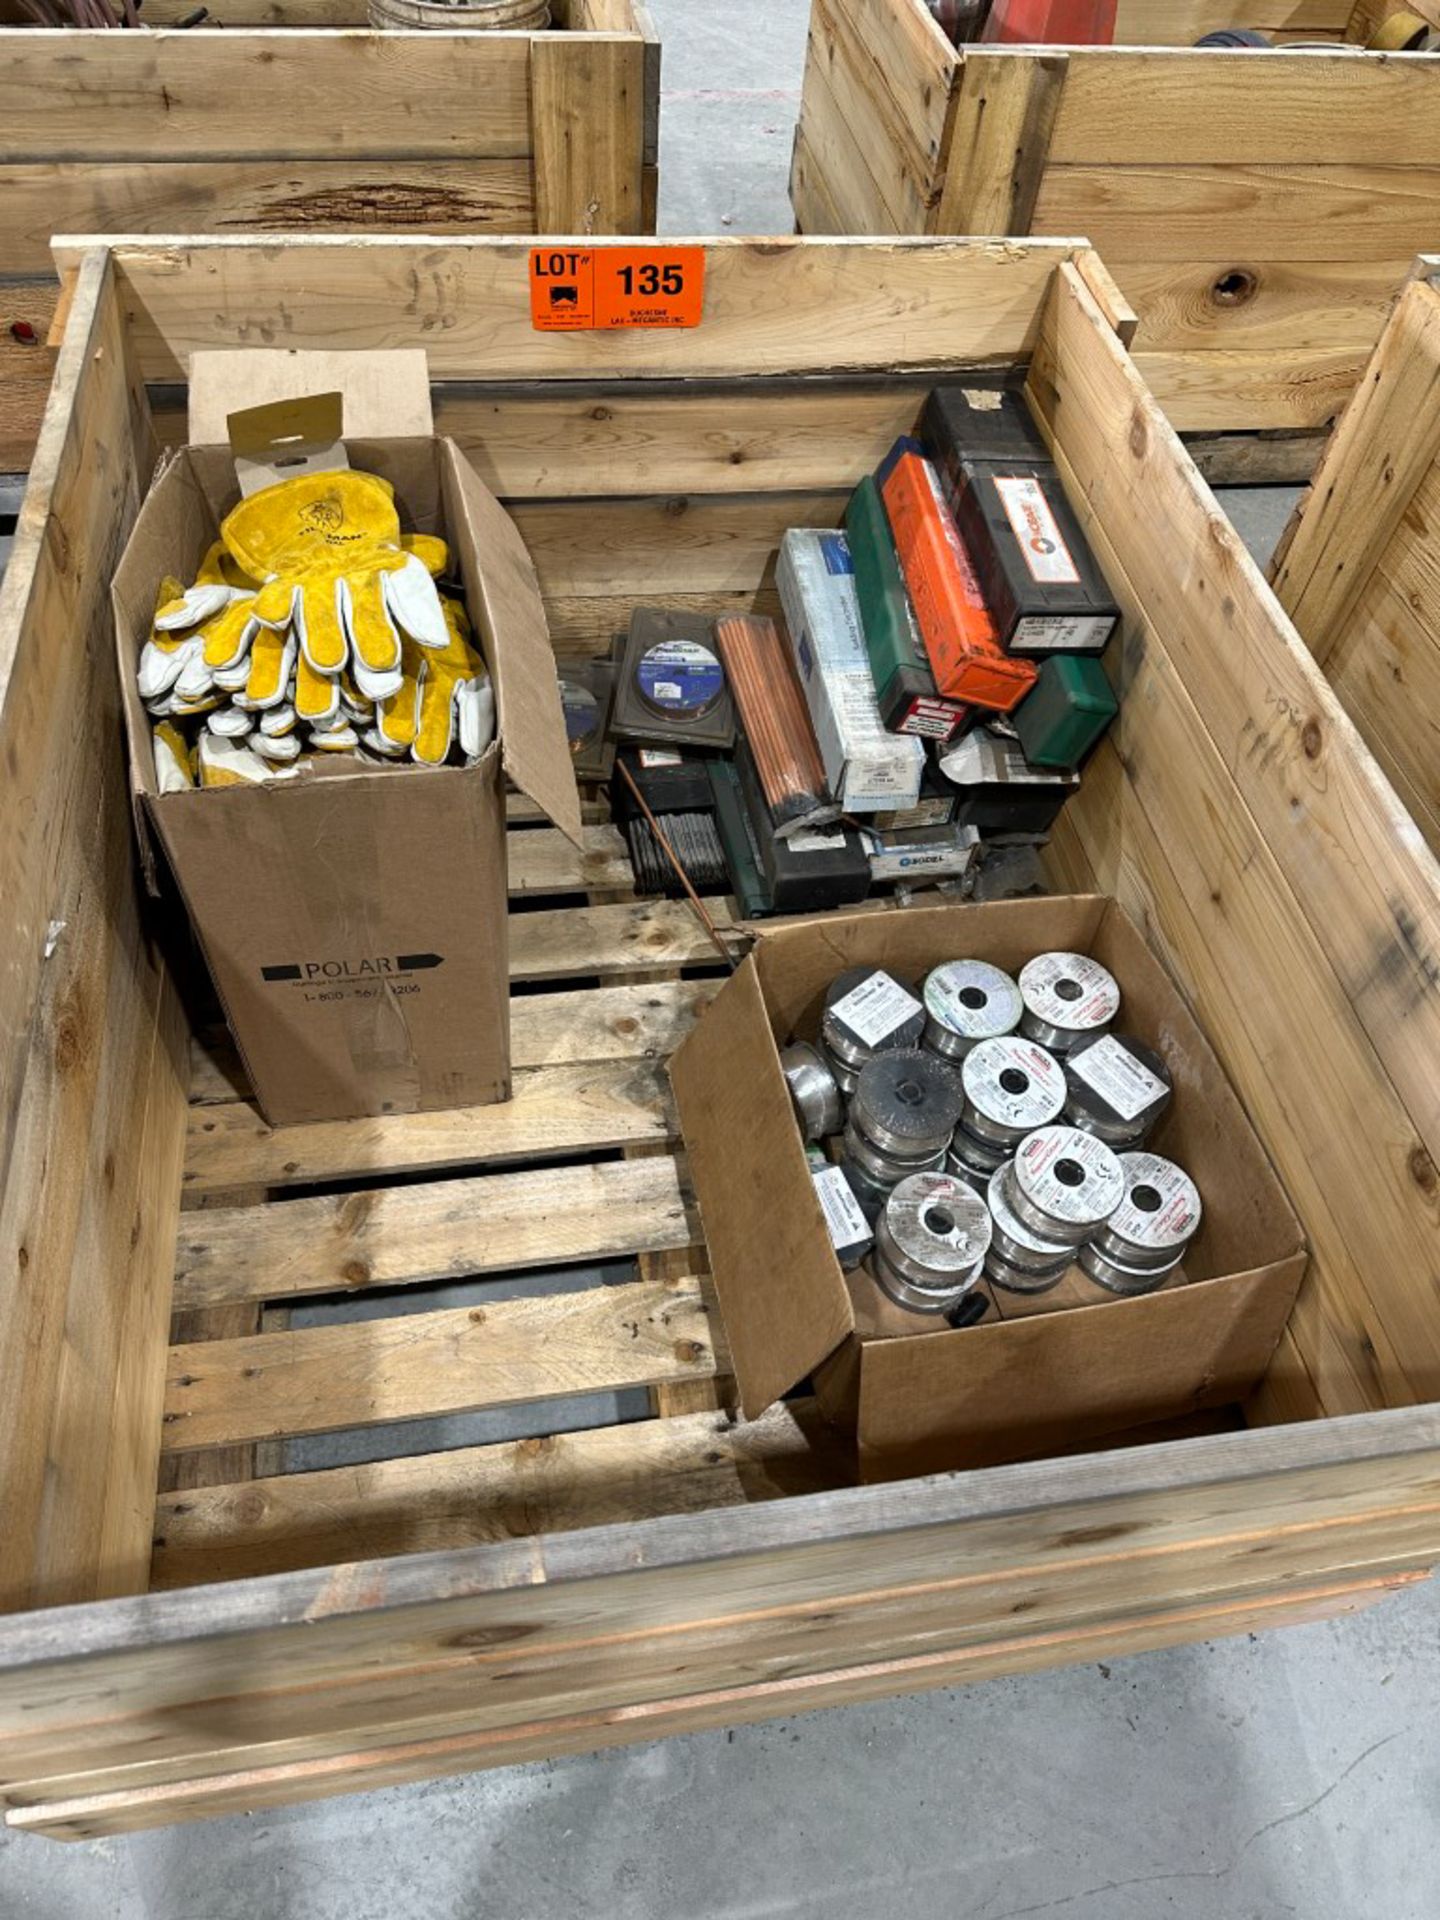 LOT/ skid and contents - welding supplies